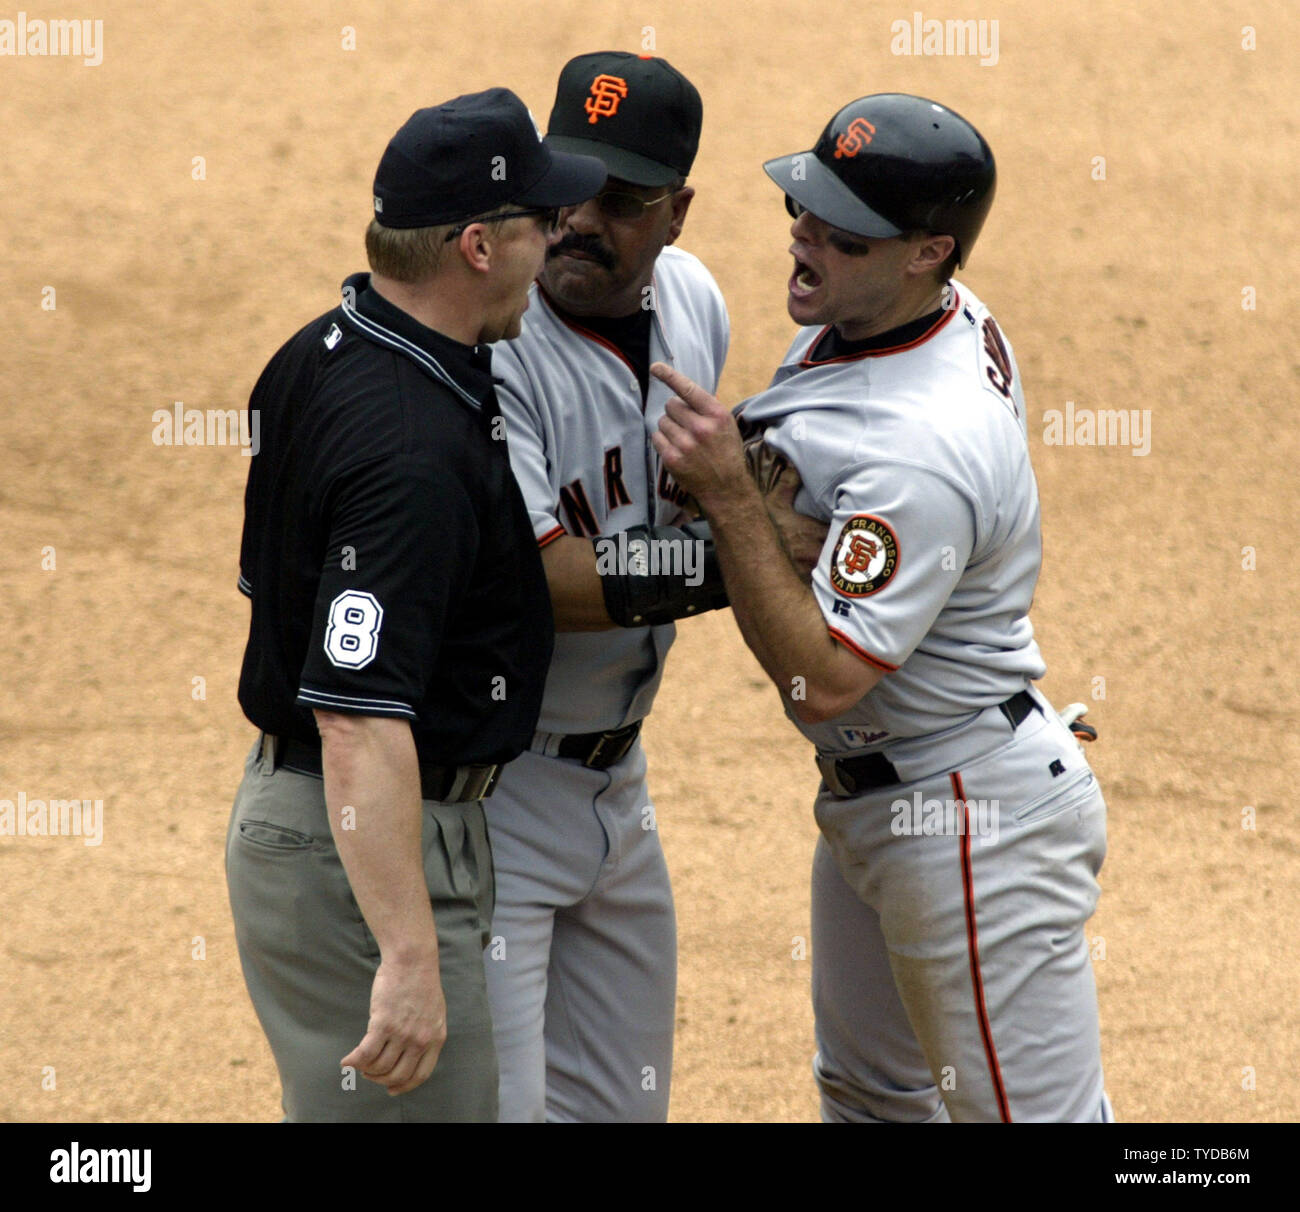 Florida Marlins catcher Ivan Rodriguez tags out San Francisco Giants J.T.  Snow to end the game, Marlins pitcher Ugueth Urbina watches, as the Marlins  beat the Giants at Pro Player Stadium, to